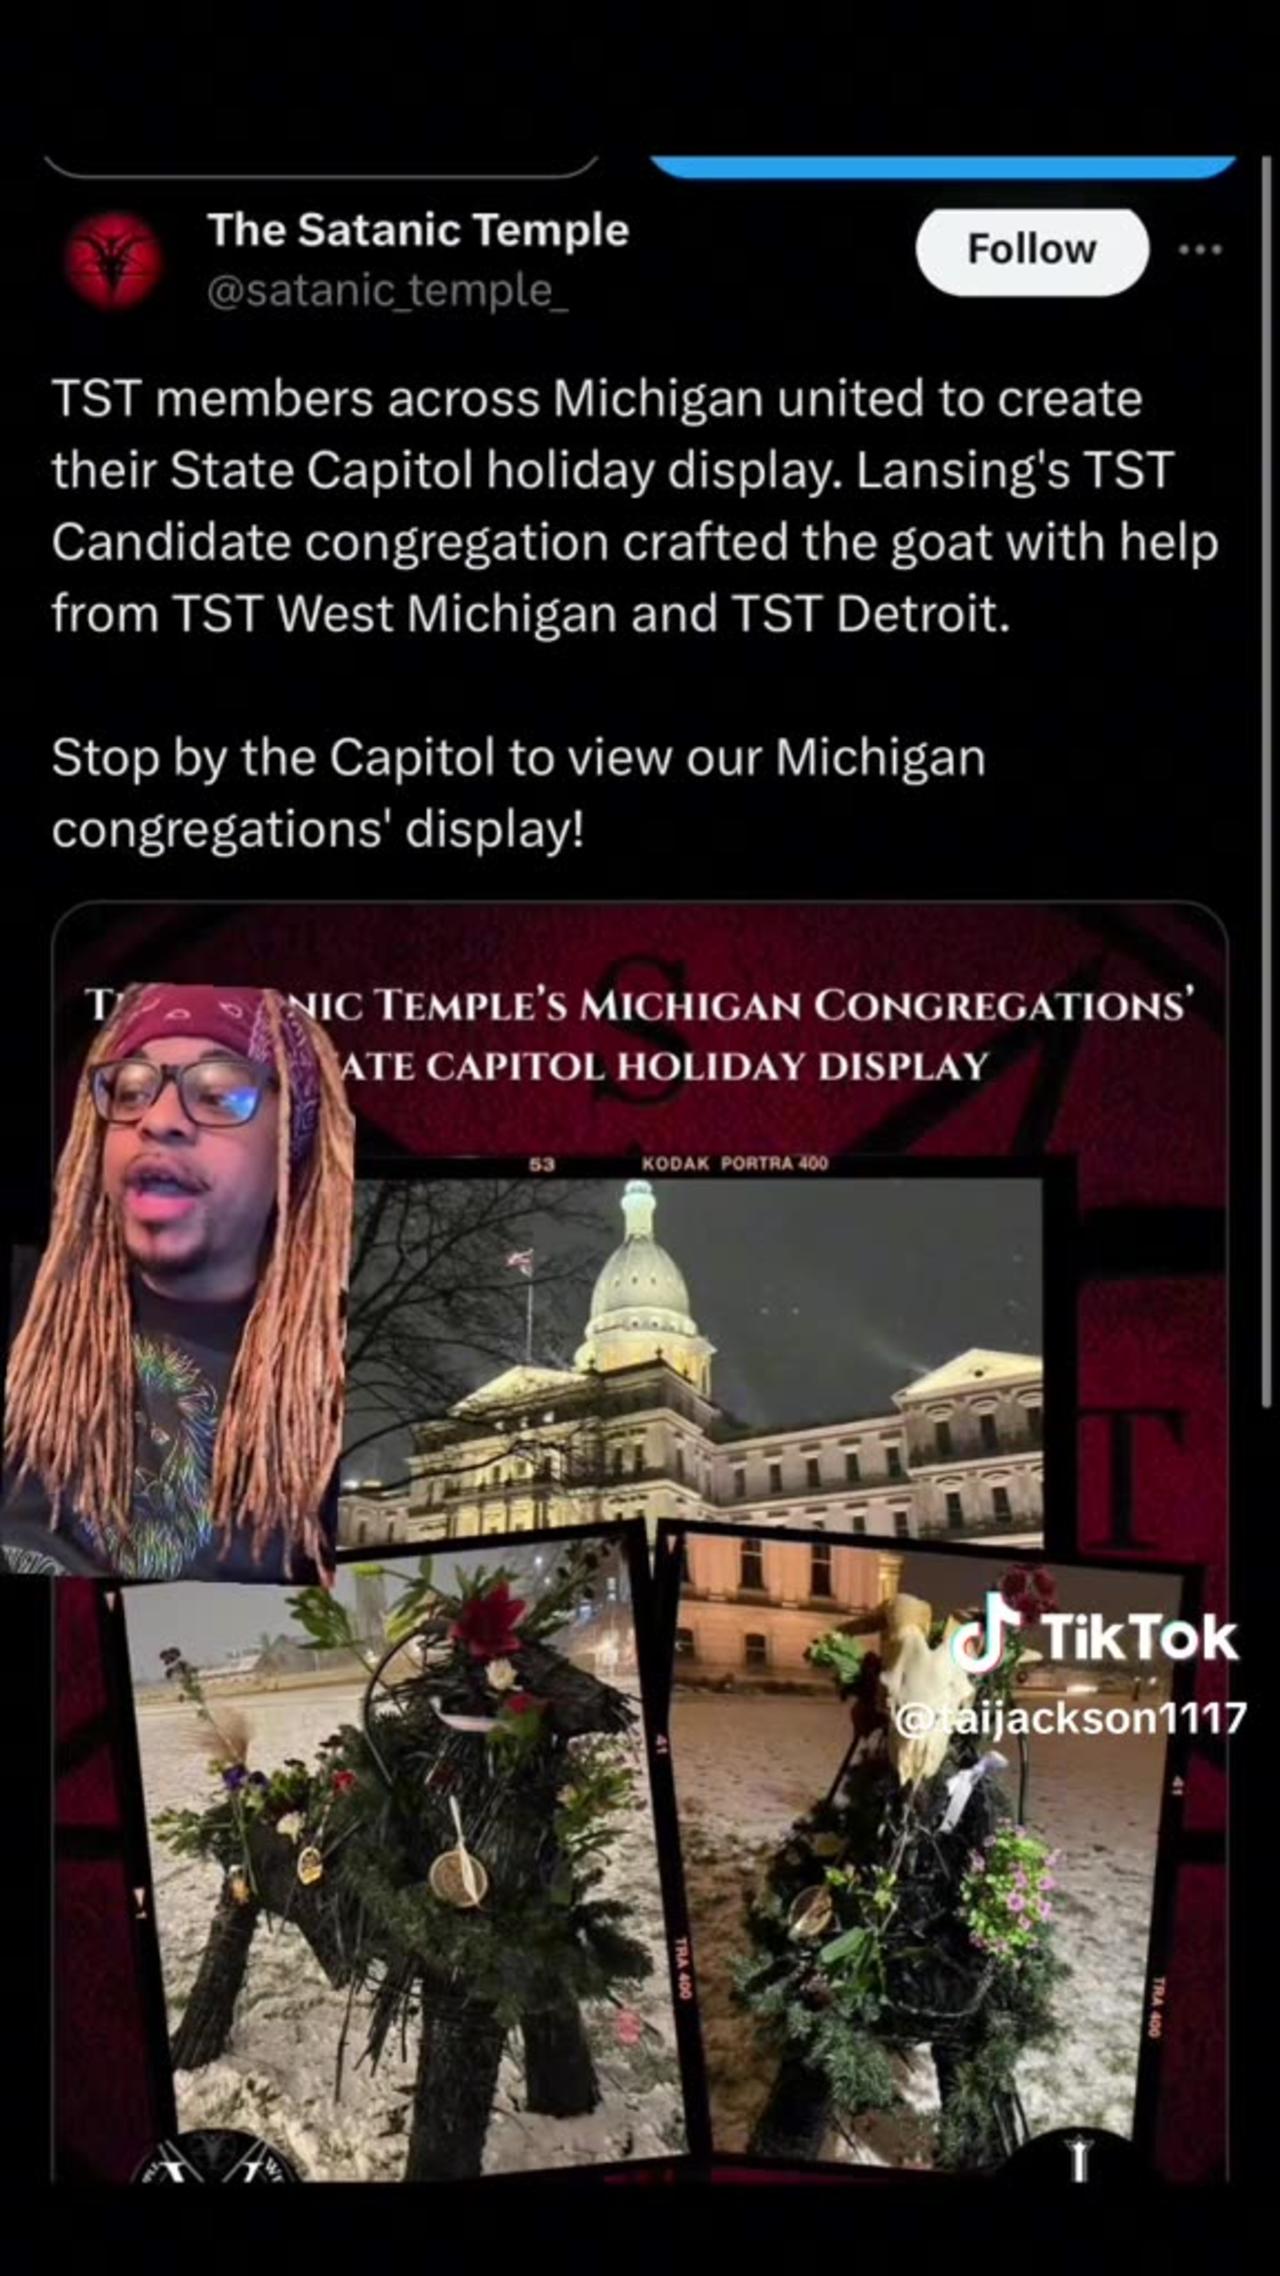 THE SATANIC TEMPLE'S MICHIGAN CONGREGATIONS' STATE CAPITOL HOLIDAY DISPLAY